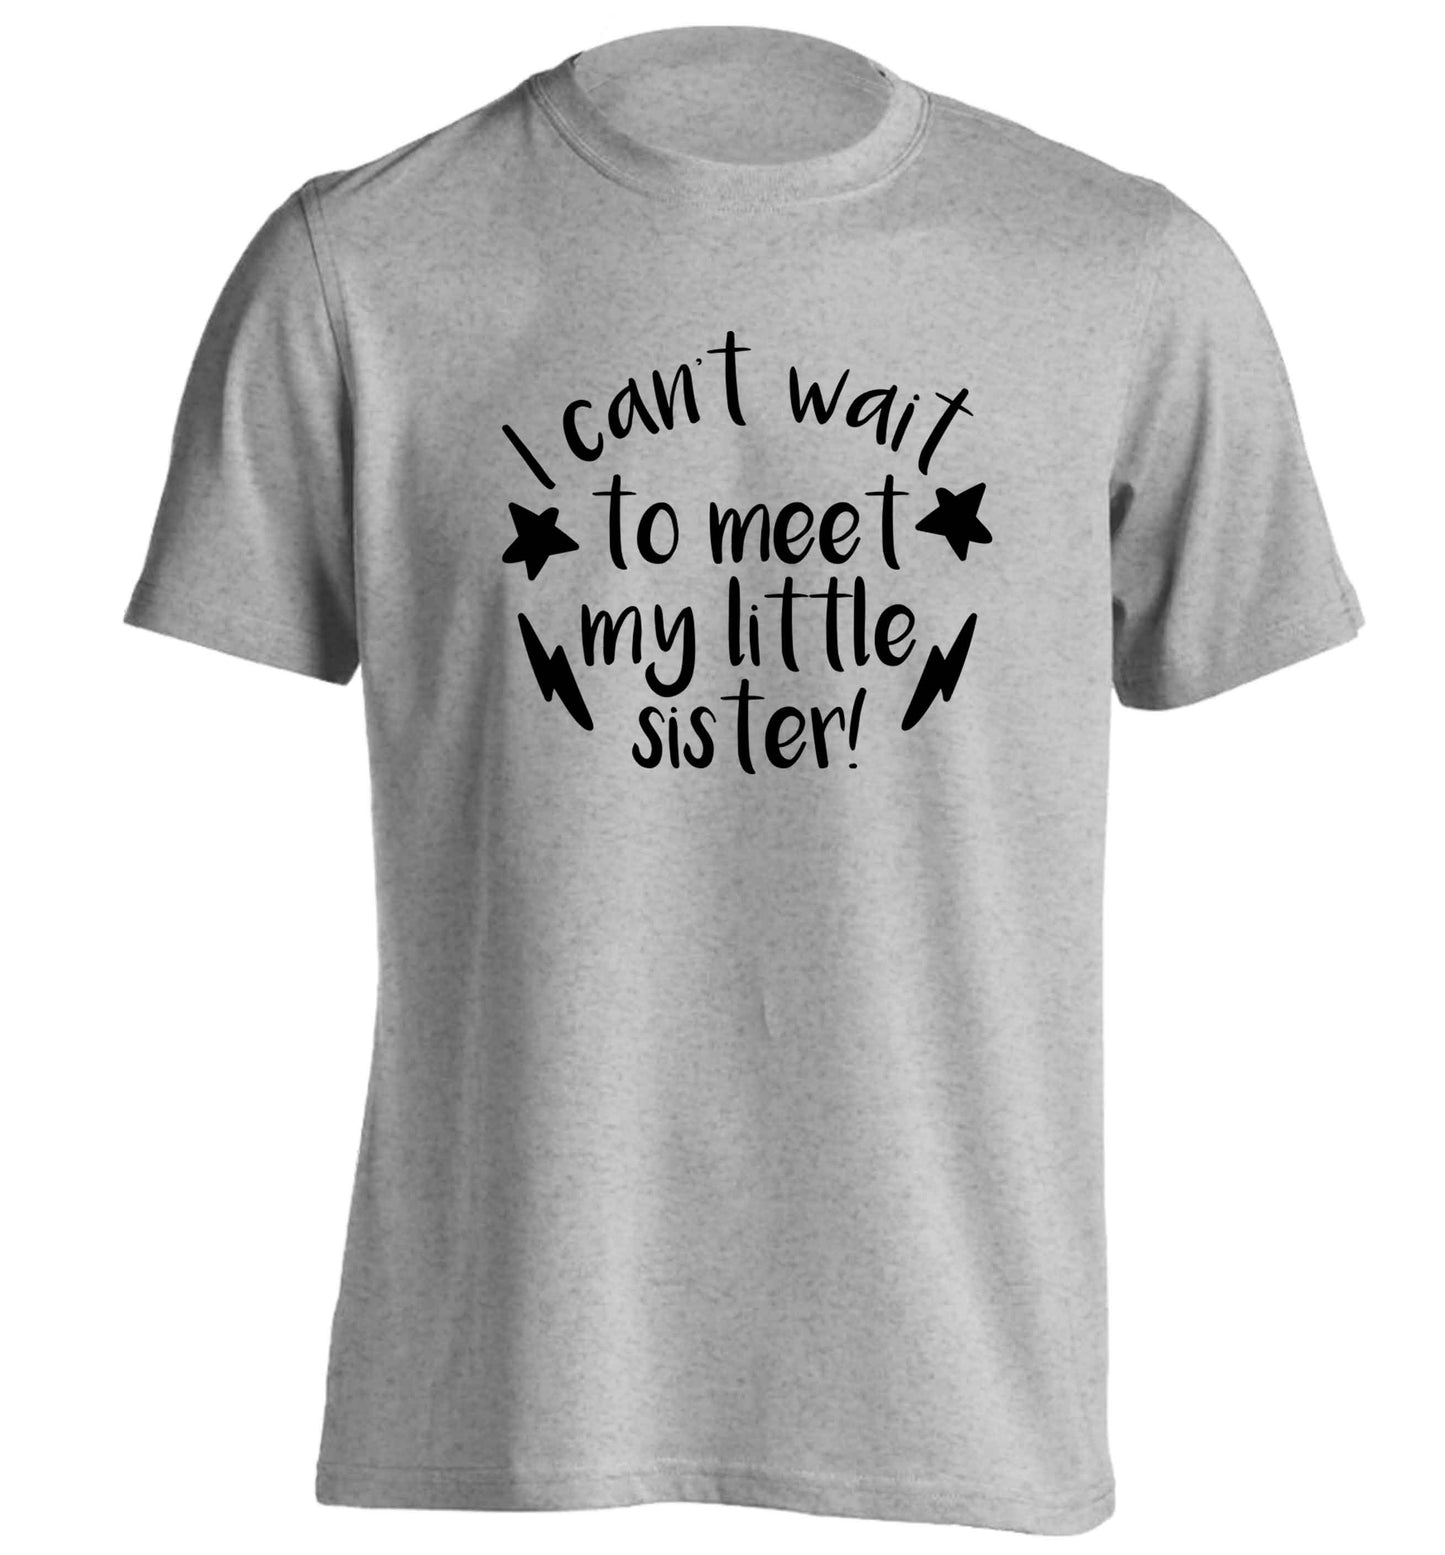 Something special growing inside it's my little sister I can't wait to say hi! adults unisex grey Tshirt 2XL